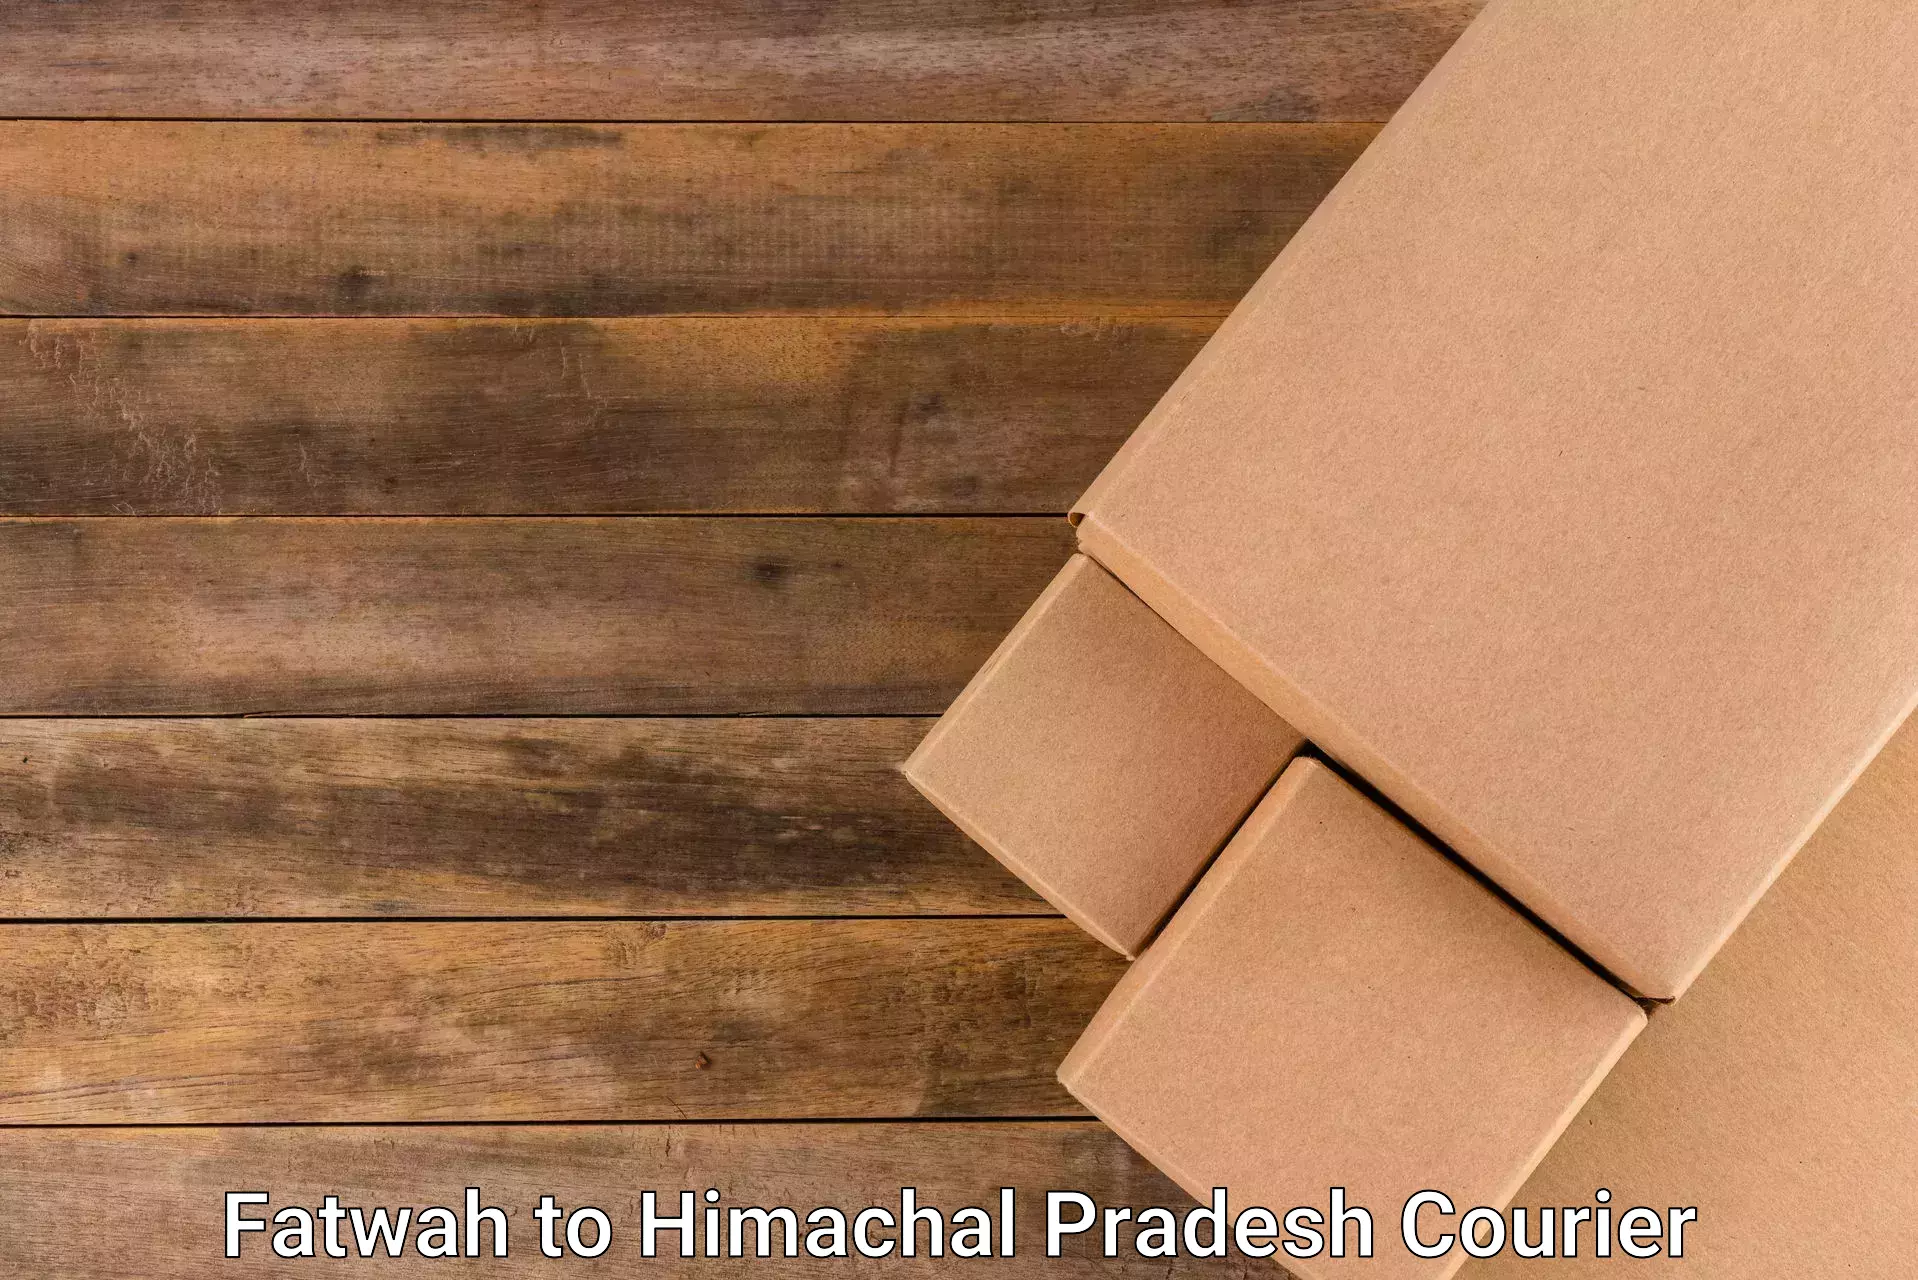 Advanced tracking systems Fatwah to Himachal Pradesh